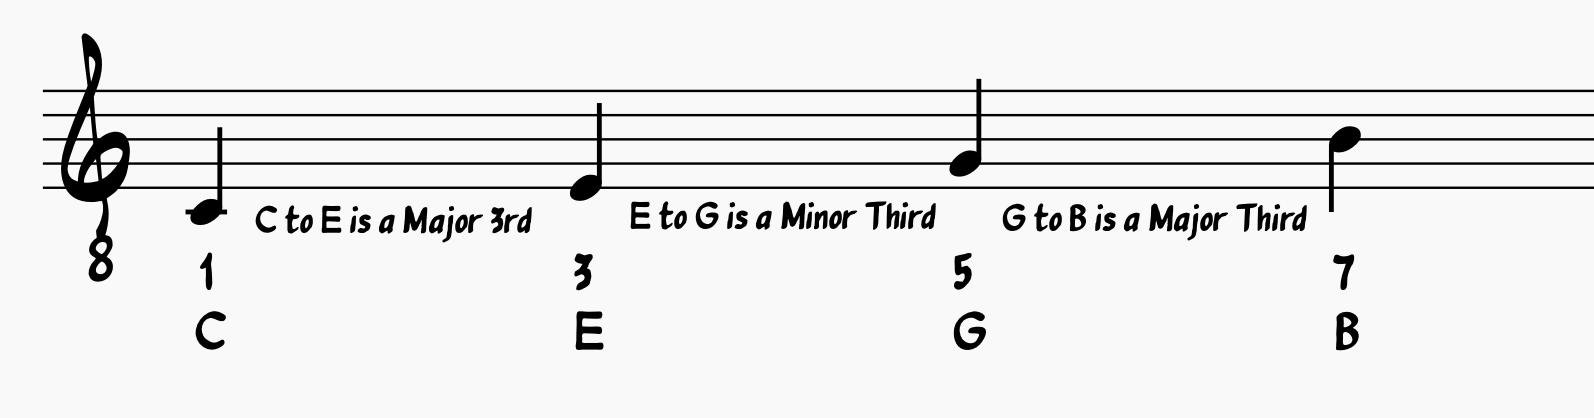 Breaking down a seventh chord into it's constituent thirds